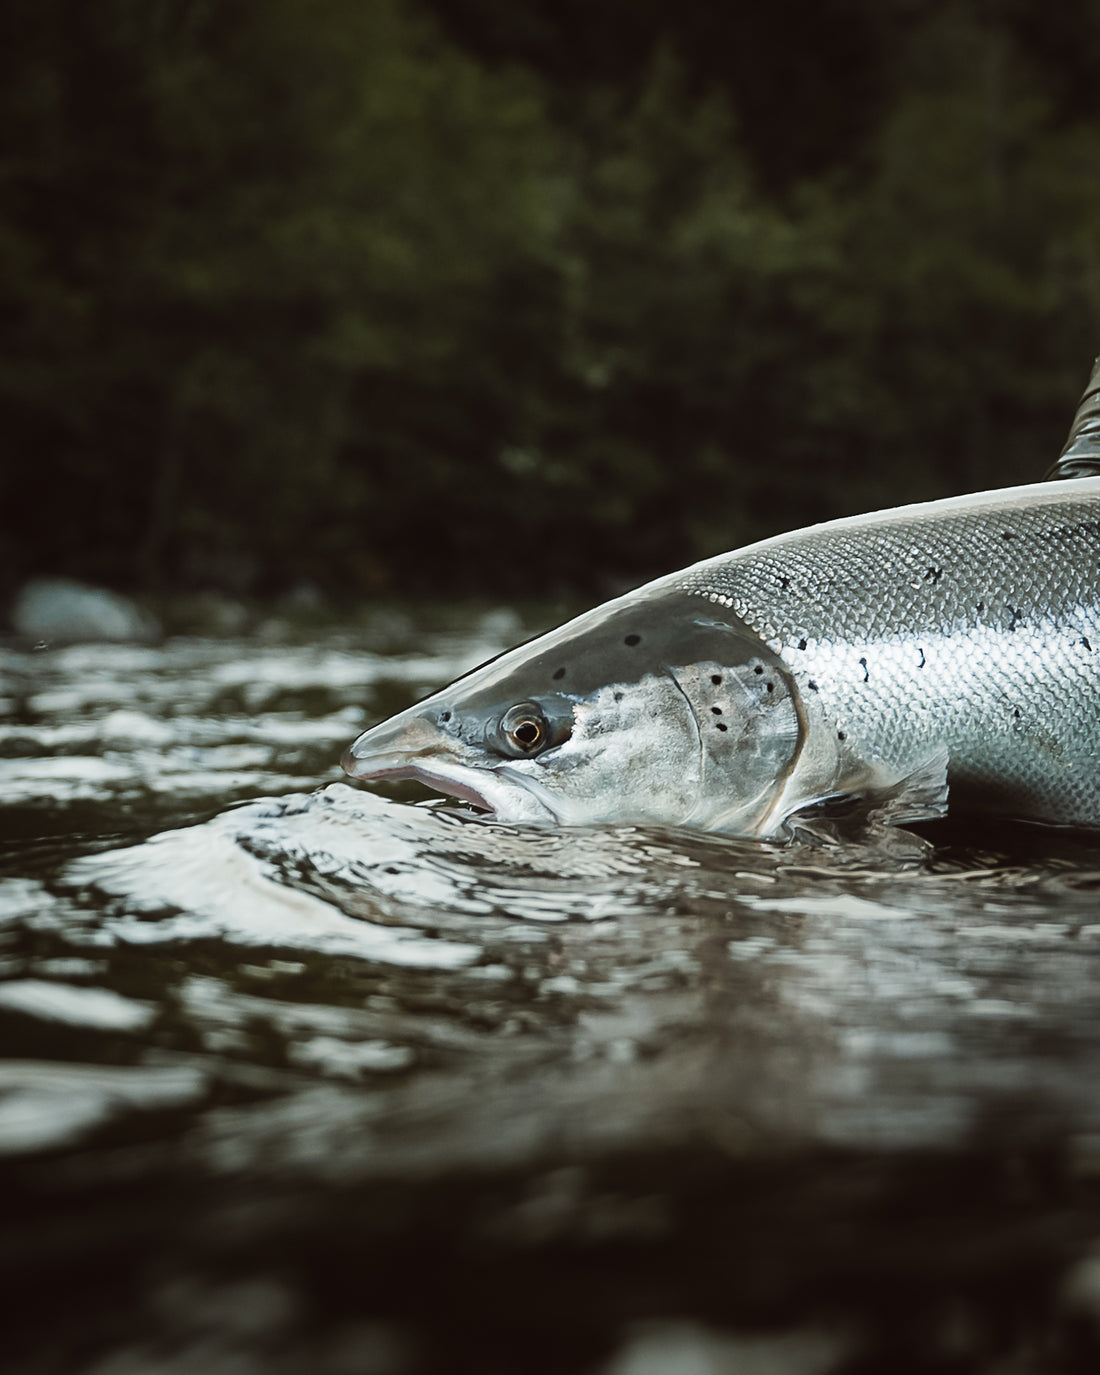 flylordsmag.com/angler-story-of-the-week-norwegian-salmon-rips-centerpin-off-reel/